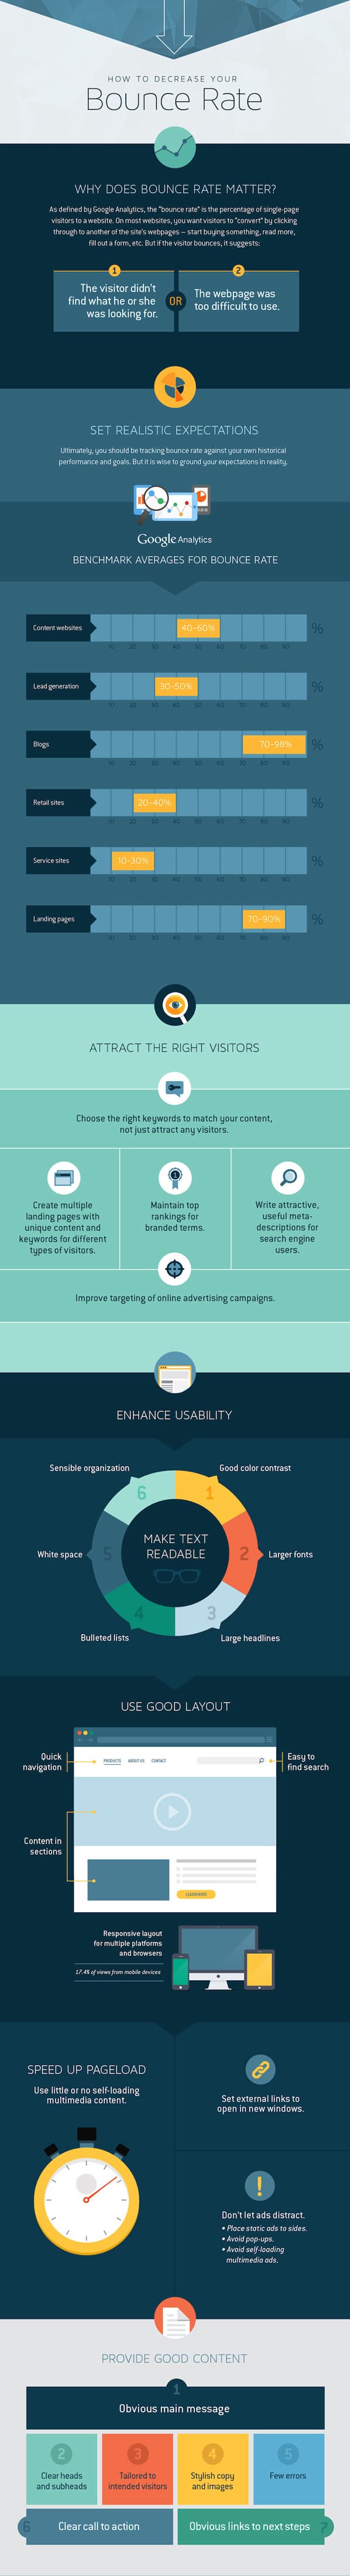 mproving Your Bounce Rate Infographic